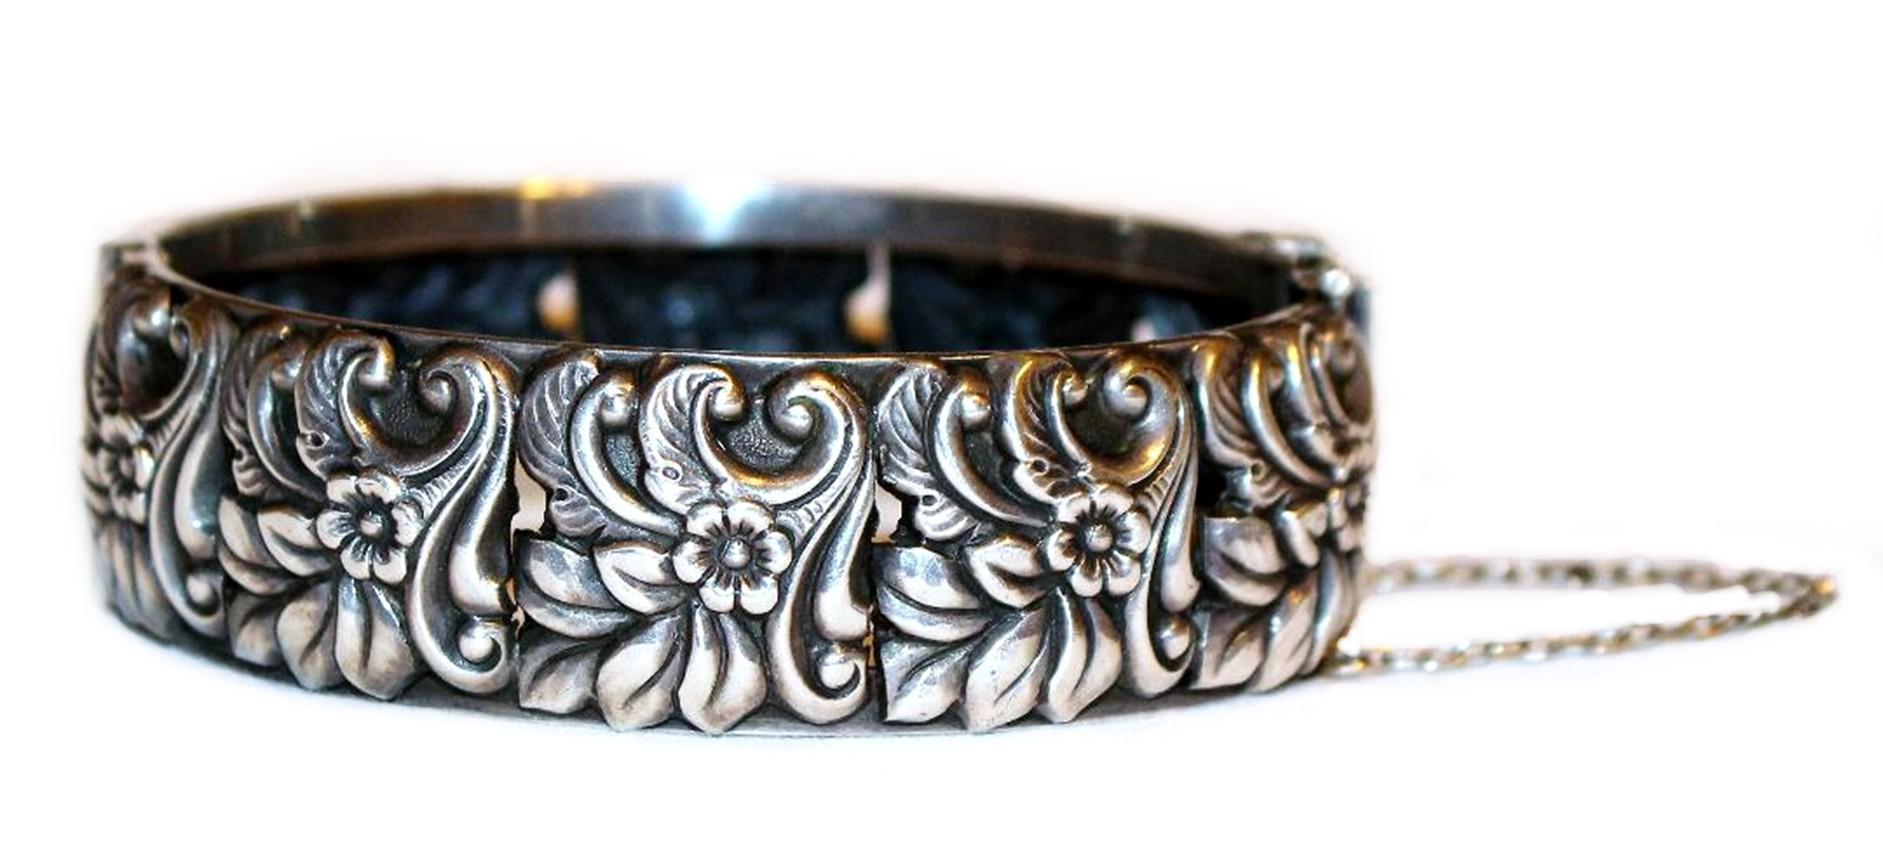 Hallmarked sterling silver hinged bangle with a repoussé floral motif all around the exterior. The interior measures 7.25